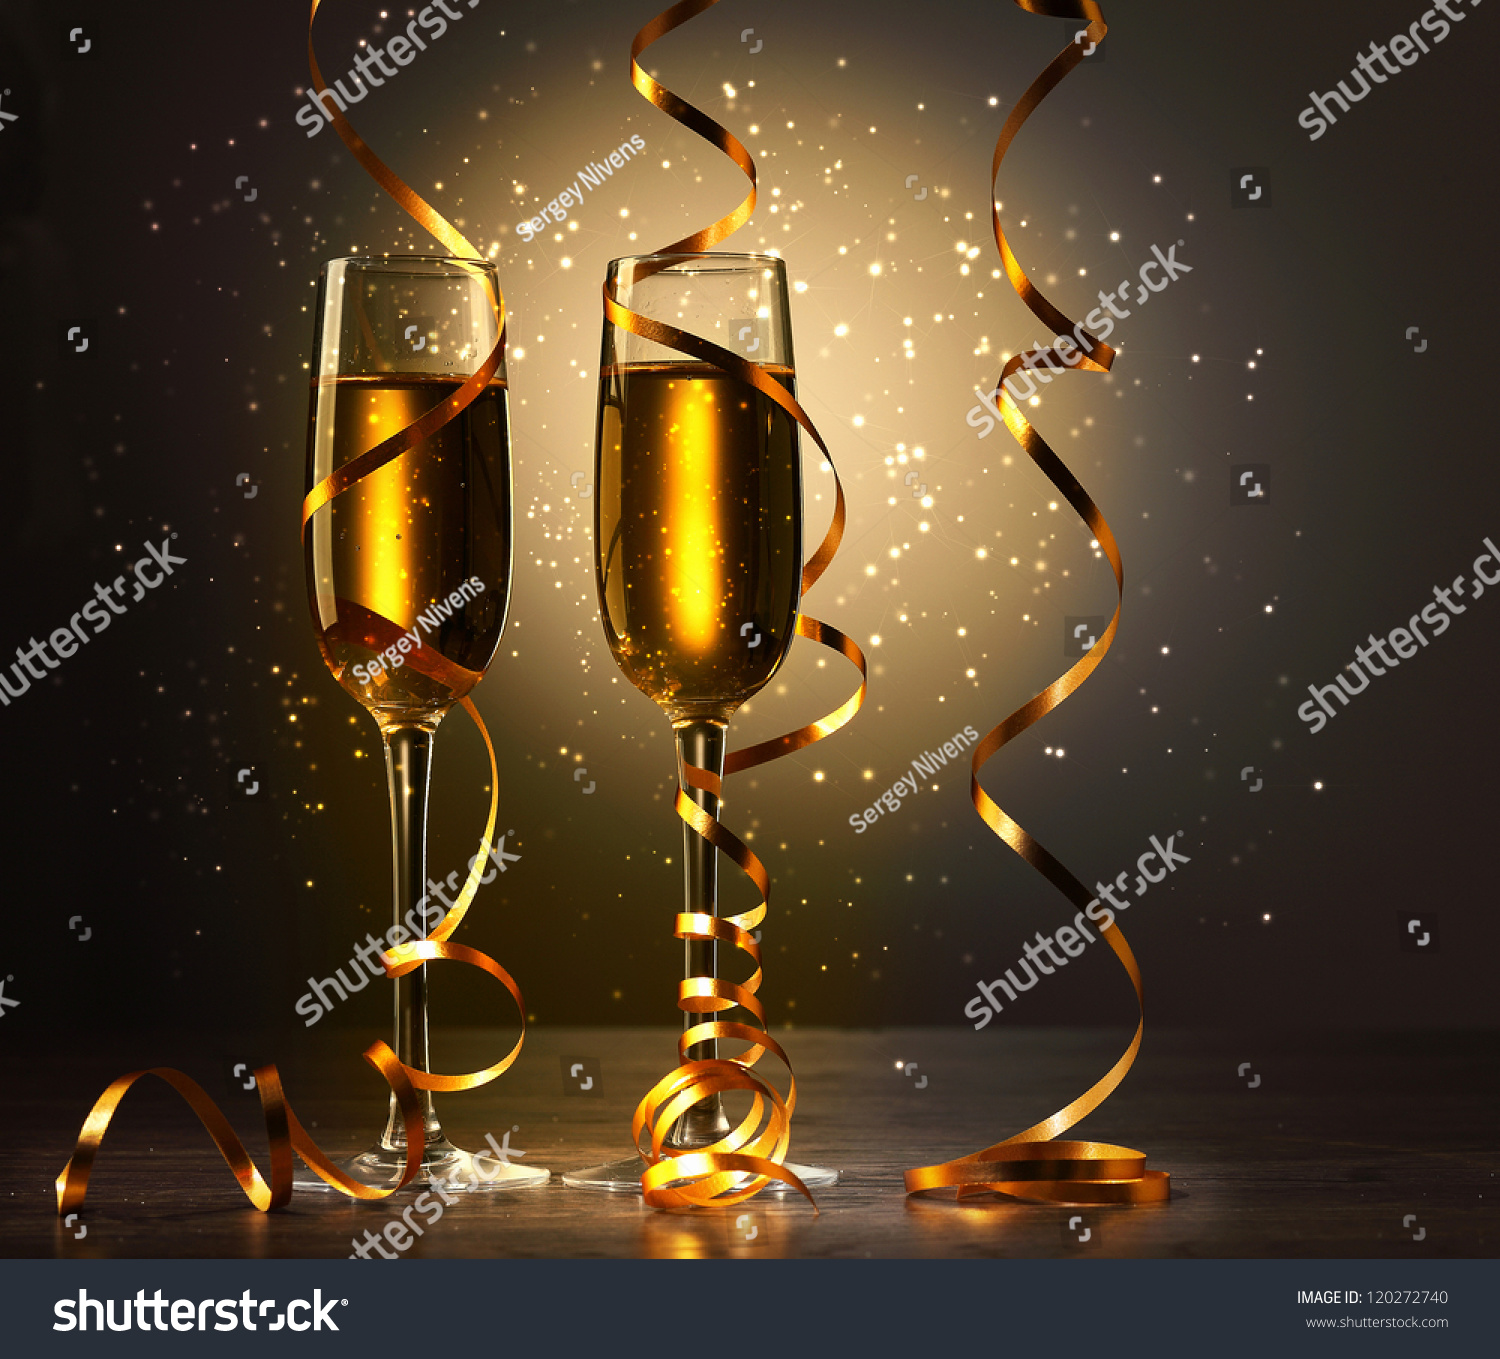 Two champagne glasses ready to bring in the New Year #120272740